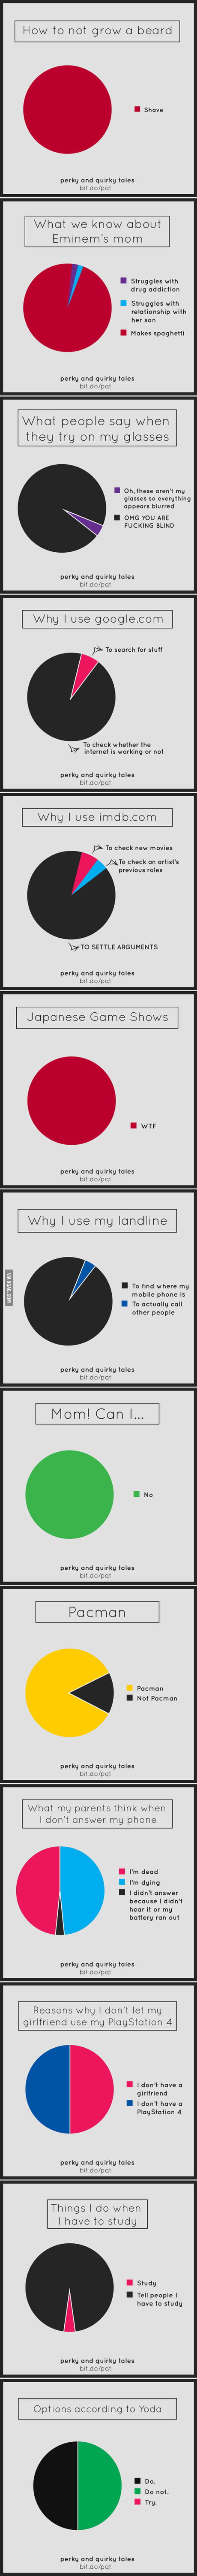 13 Funny Pie Charts About Your Daily Life (By Perky & Quirky Tales) - 9GAG